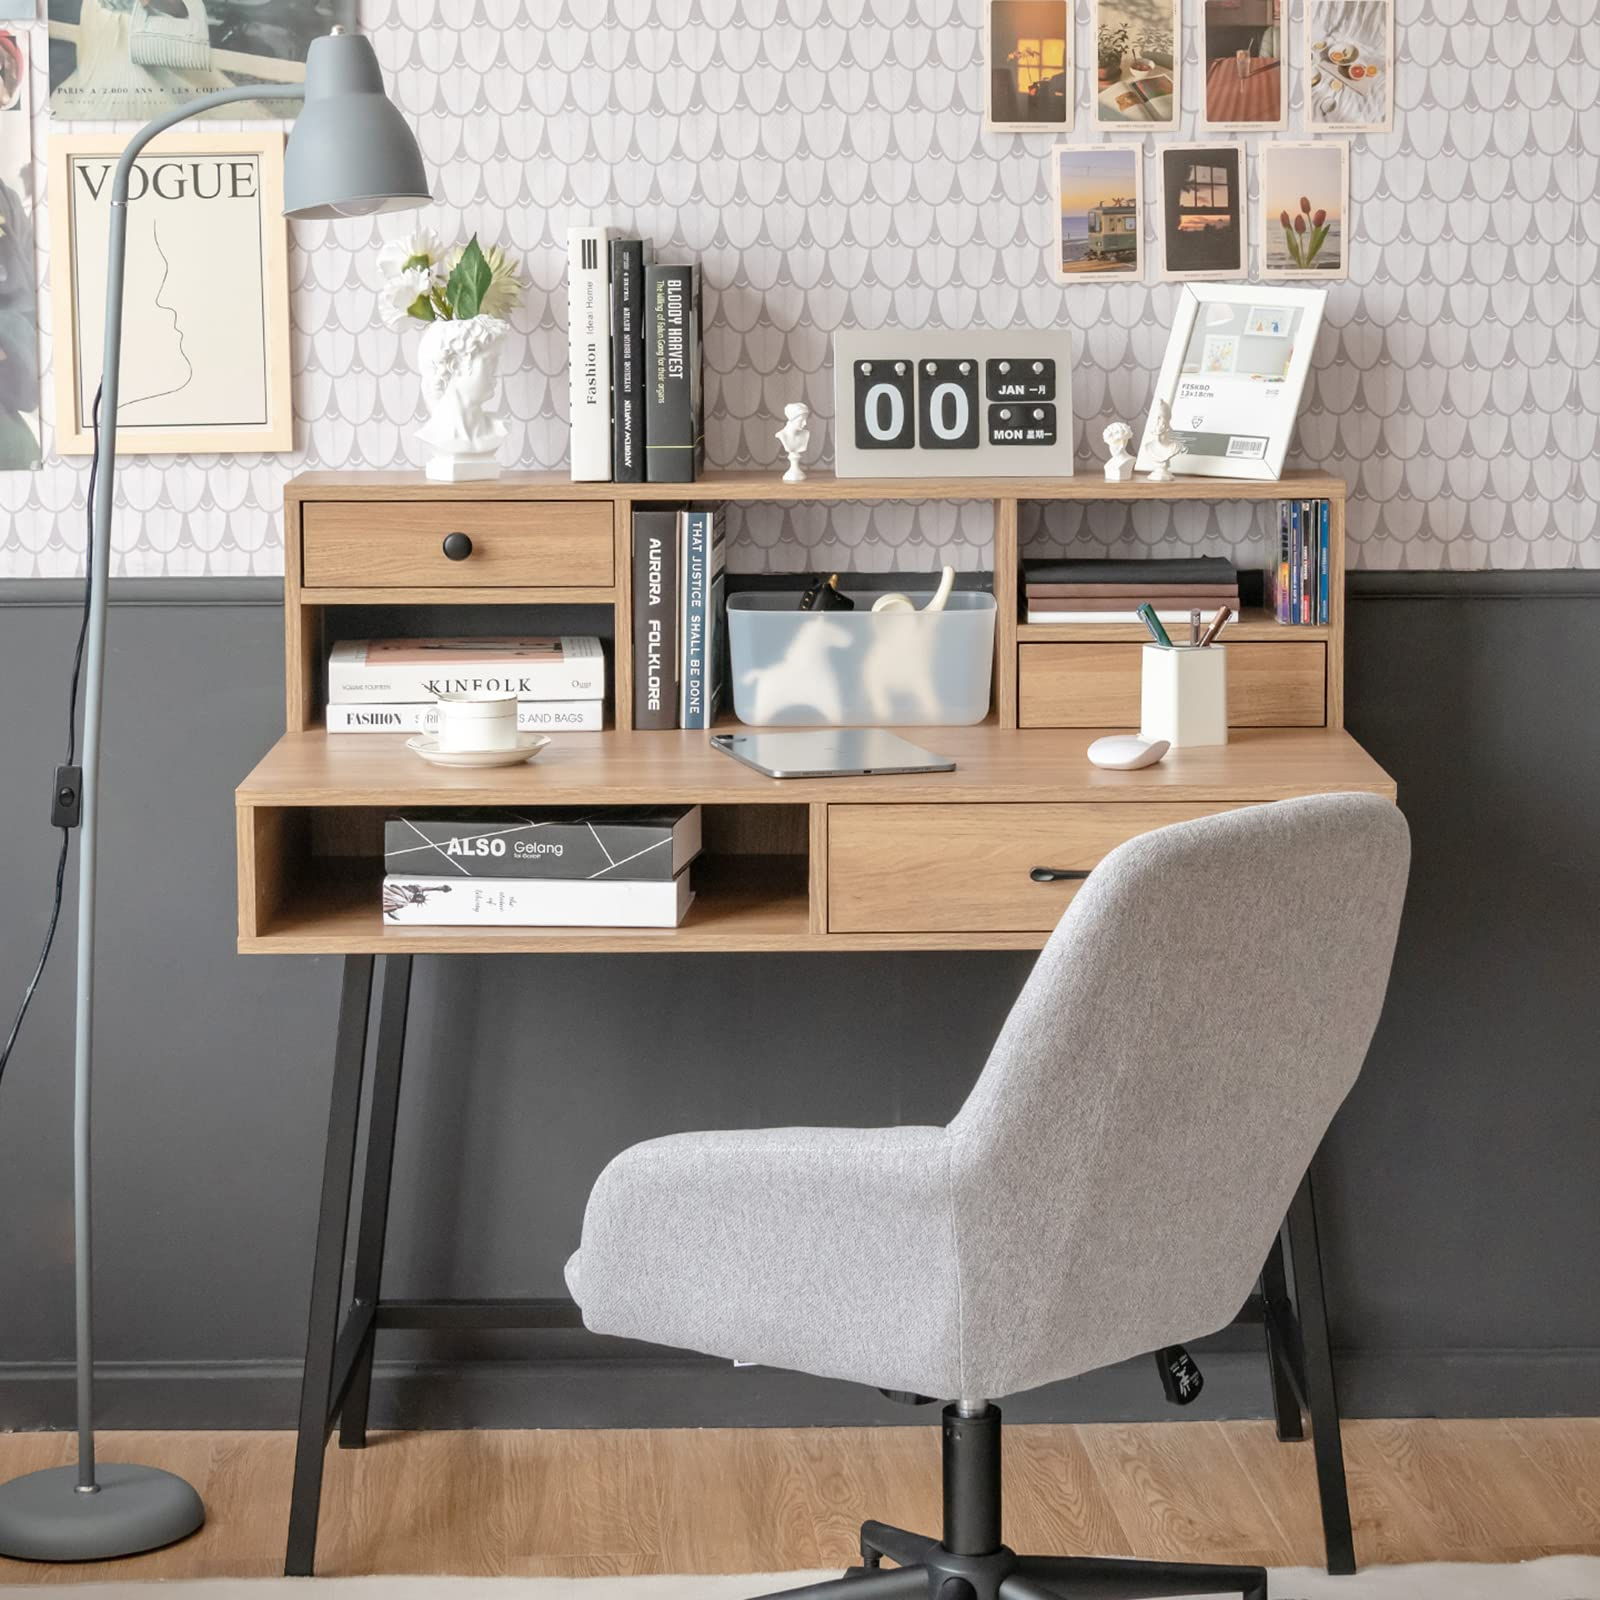 Tips to design an organized, clean and neat study room